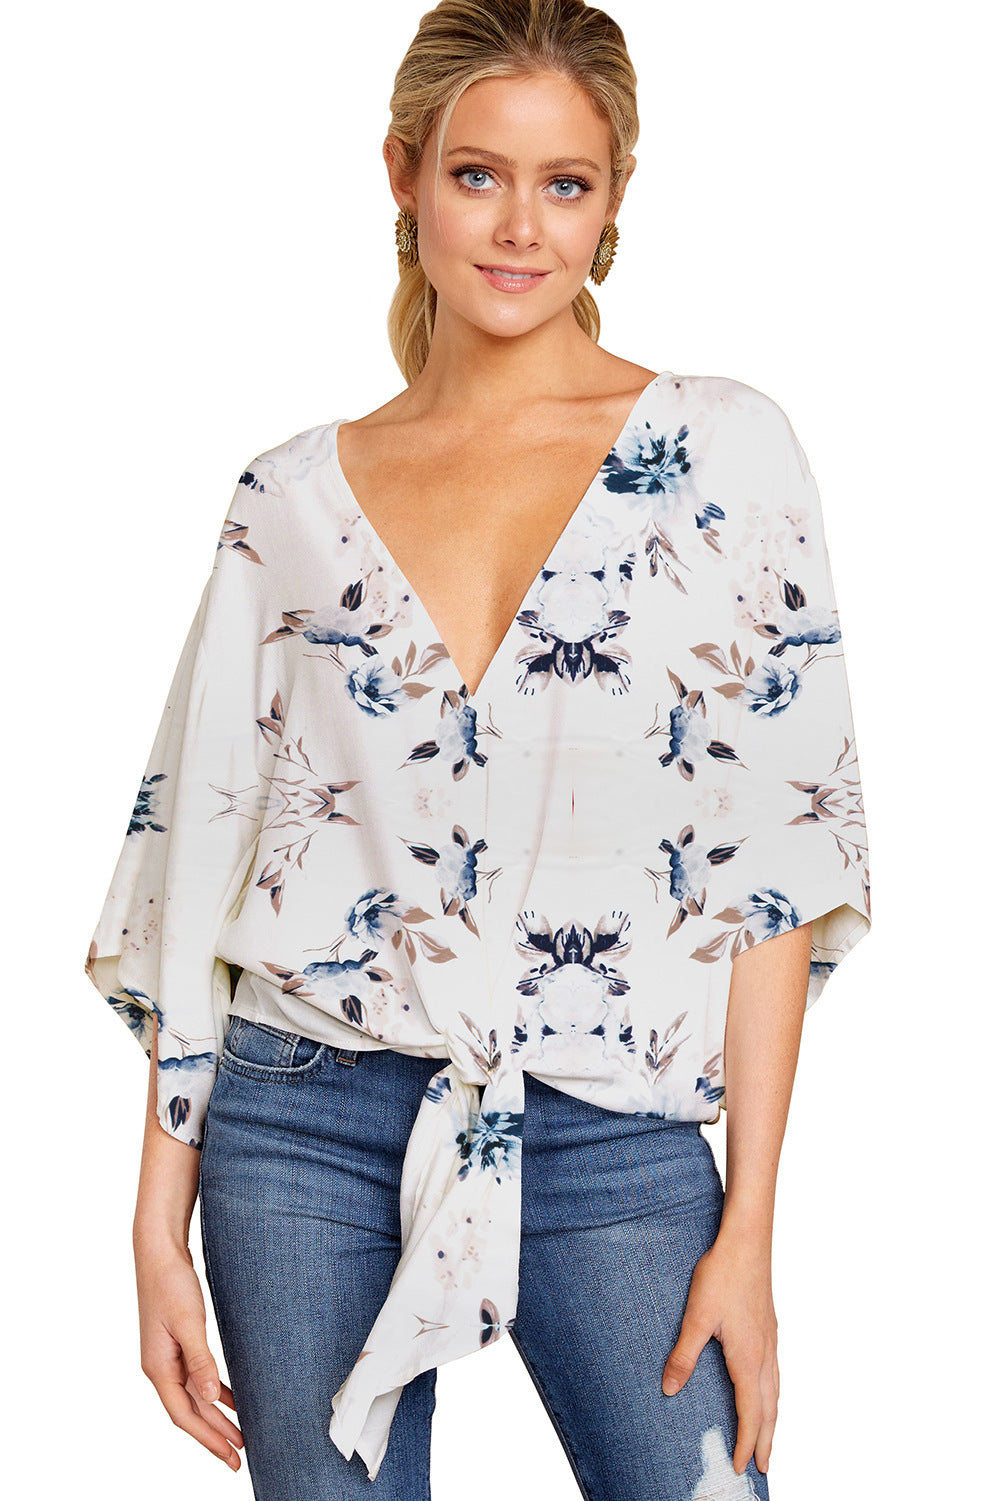 Spring And Summer New V-neck Short-sleeved Printed Loose Top Women's